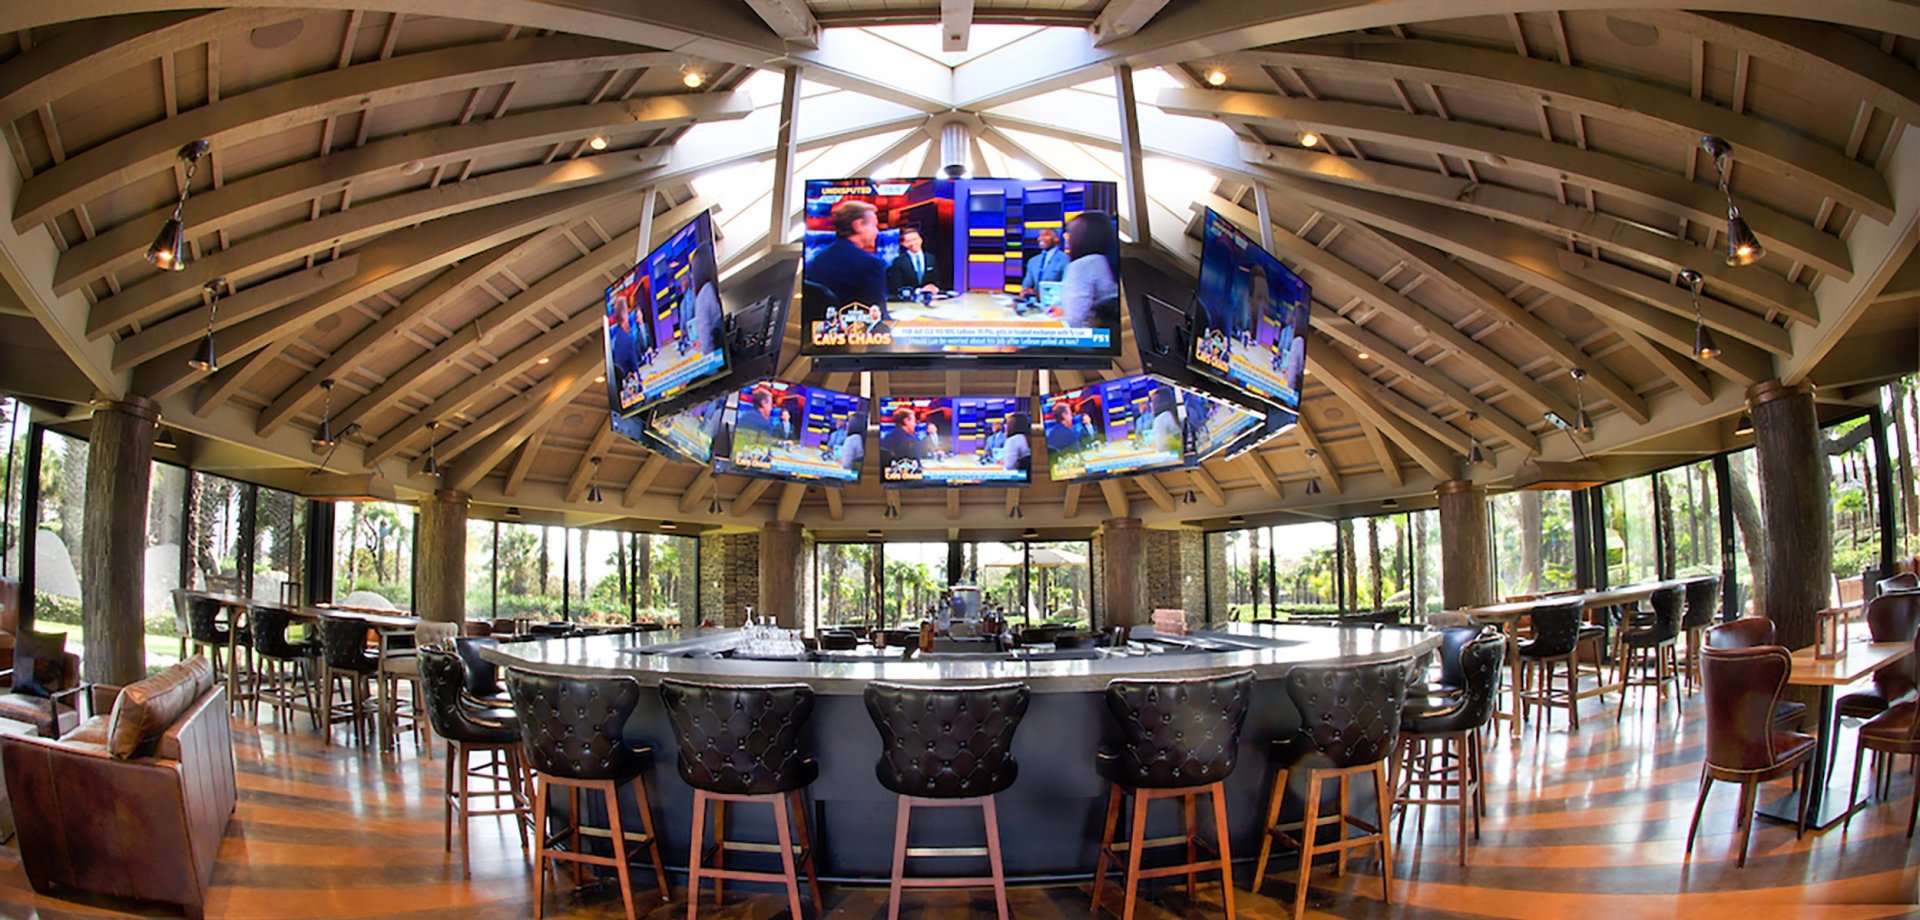 360 view of bar and restaurant